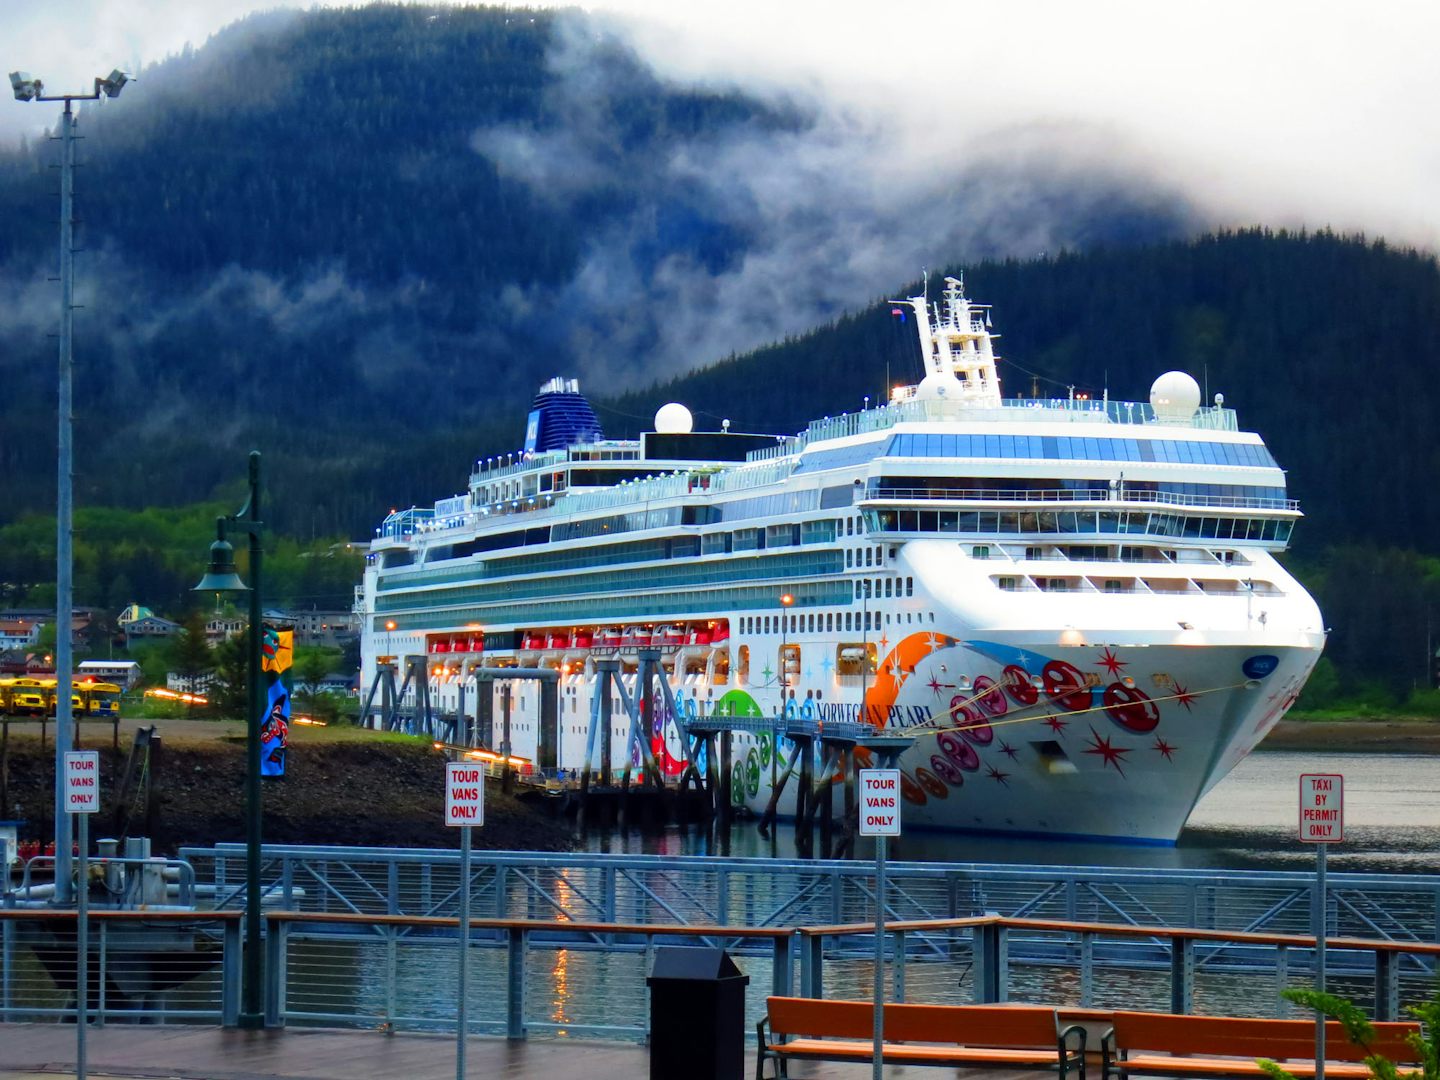 NCL Pearl at the AJ Dock in Juneau shortly before departure. Beautiful ship!  I think I